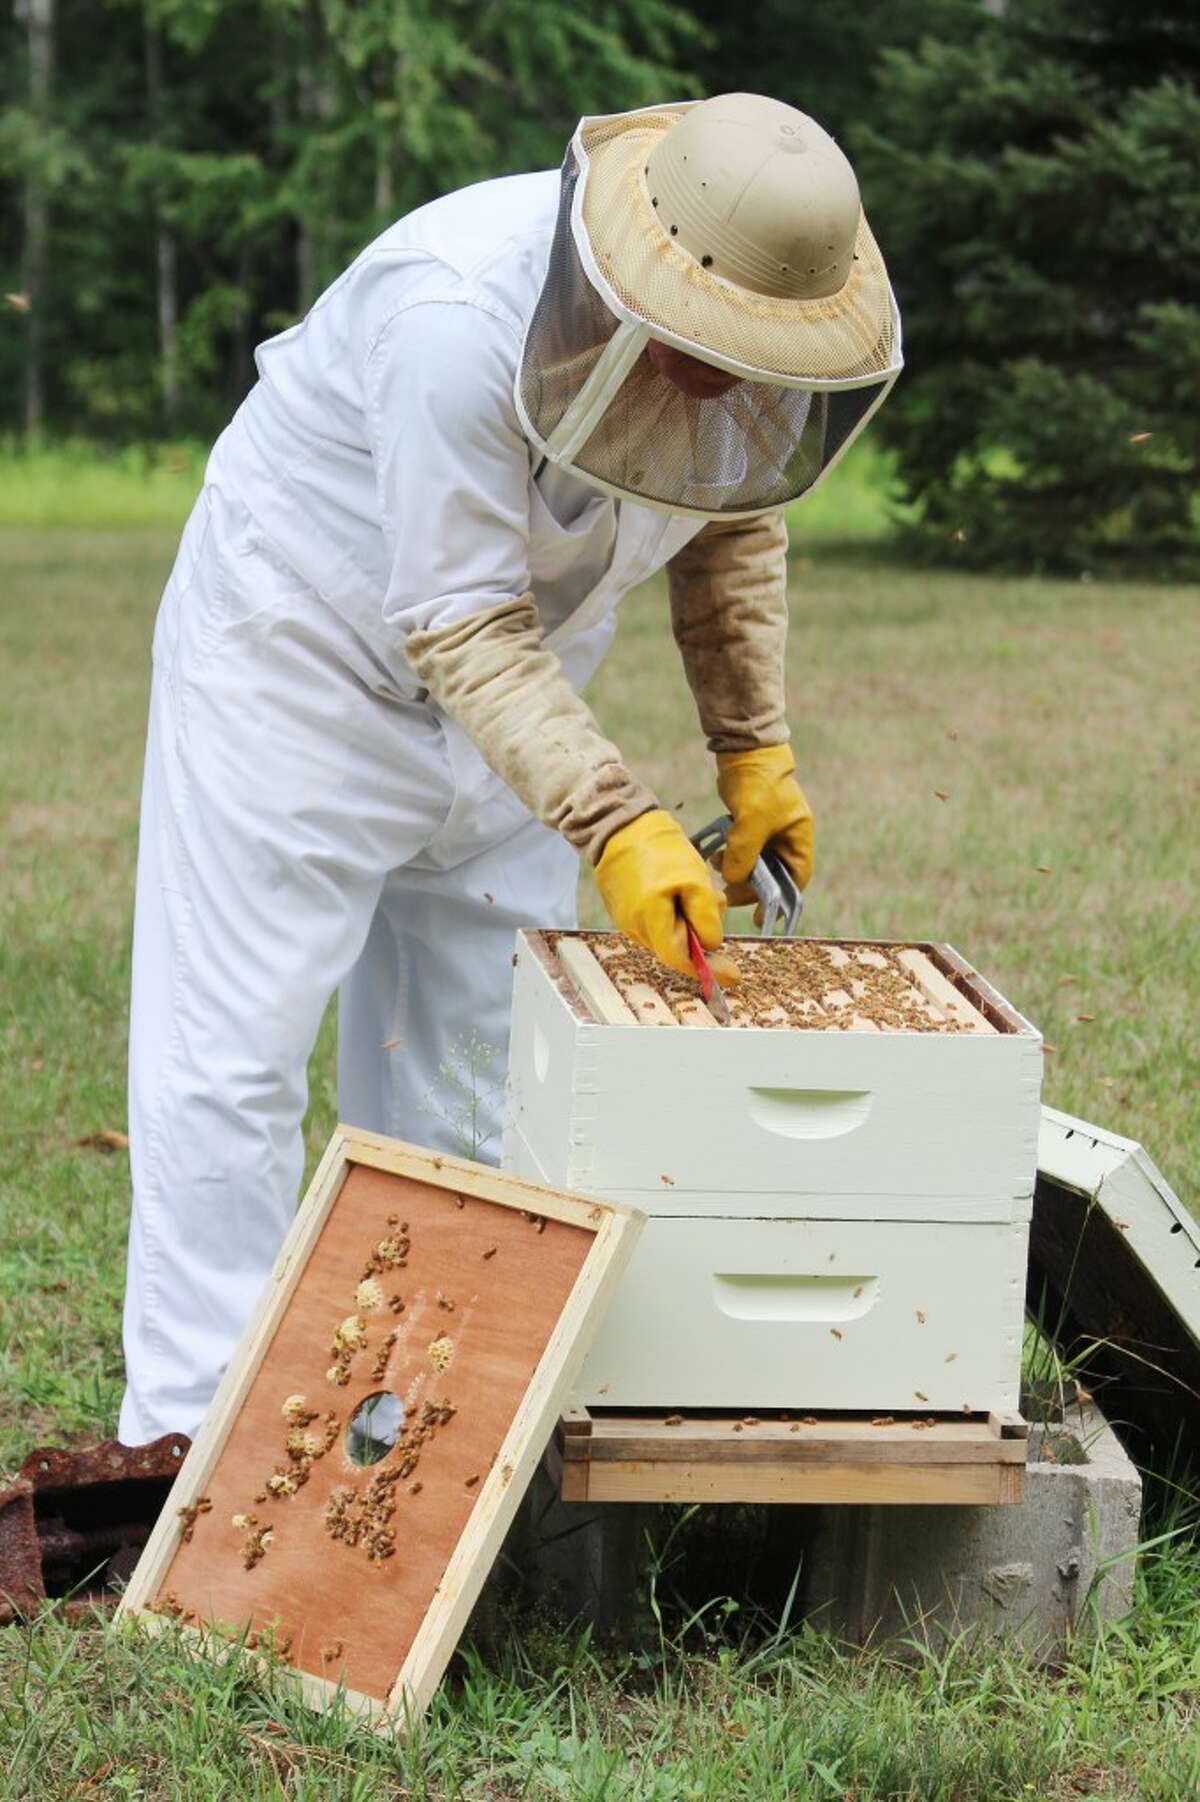 TENDING BEES: Each section of a bee hive can produce 3 pounds of honey per year.